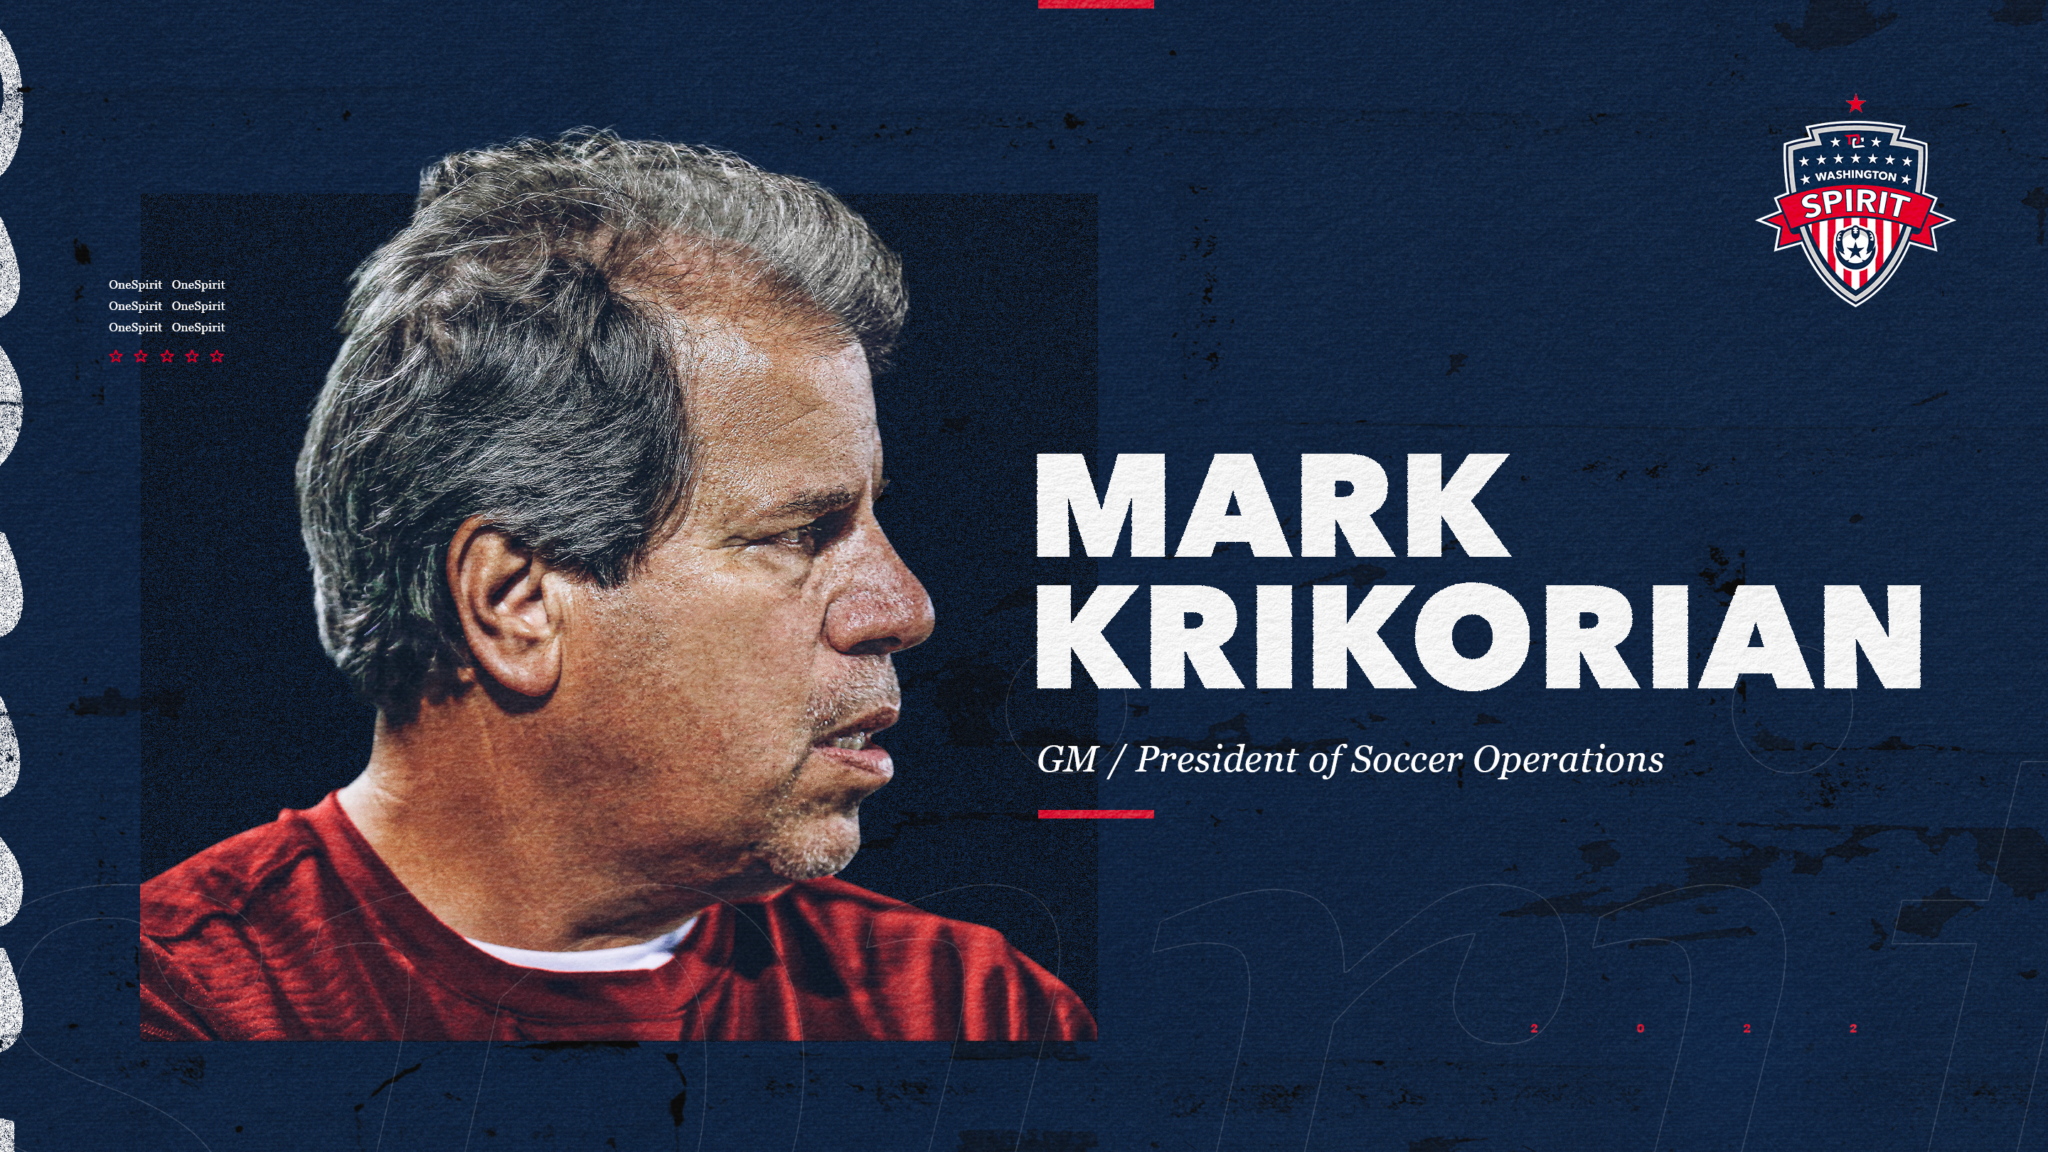 Washington Spirit Names Mark Krikorian President of Soccer Operations and General Manager Featured Image